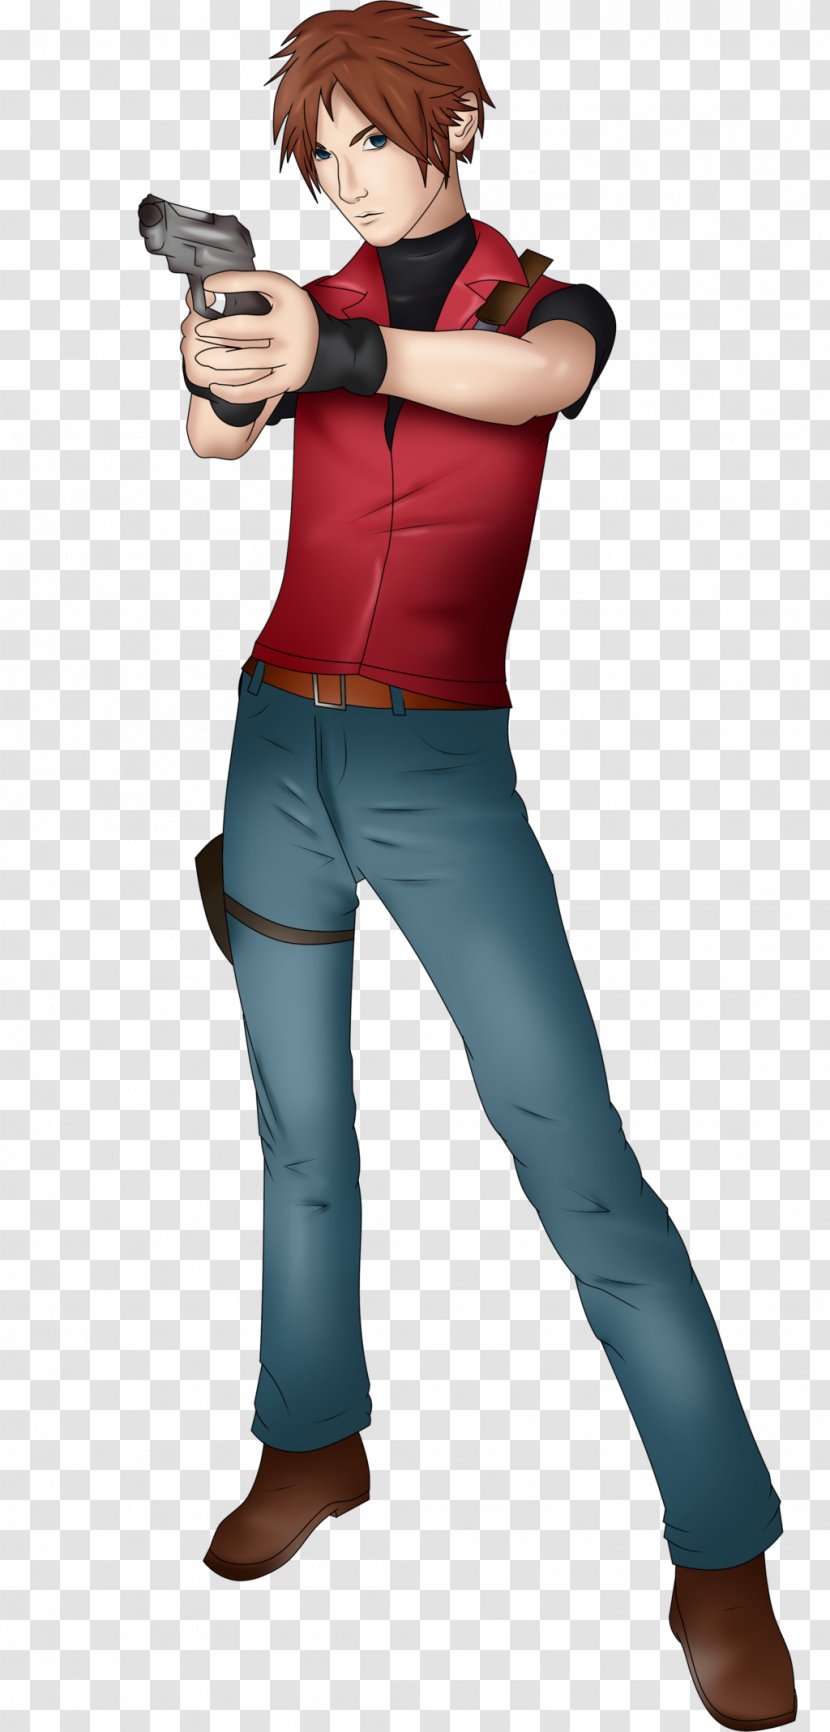 Jill Valentine Claire Redfield Chris Rebecca Chambers Ada Wong - Tree - Resident Evil Transparent PNG